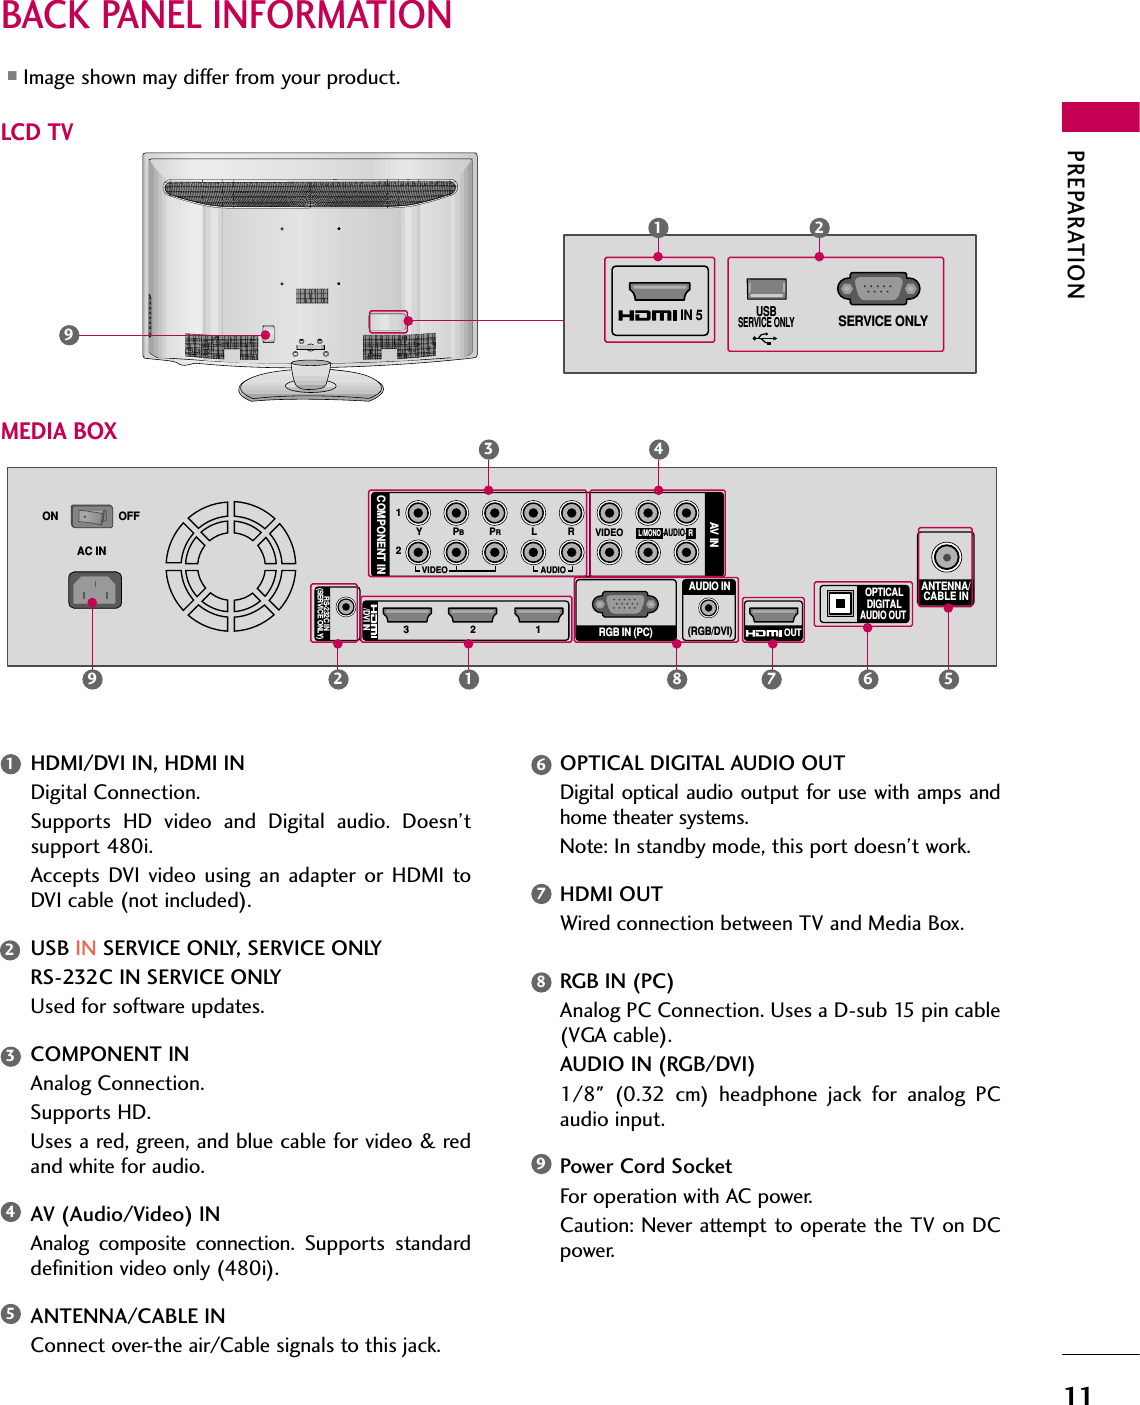 PREPARATION11BACK PANEL INFORMATION■Image shown may differ from your product.12COMPONENT INAV INLYPBPRRVIDEOAUDIOL/MONOR213/DVI INRGB IN (PC)AUDIO IN(RGB/DVI) OUTOPTICALDIGITALAUDIO OUT ANTENNA/CABLE INRS-232C IN(SERVICE ONLY)OFFONAC INVIDEOAUDIO41 8 6 5293LCD TVMEDIA BOX79HDMI/DVI IN, HDMI INDigital Connection. Supports  HD  video  and  Digital  audio.  Doesn’tsupport 480i. Accepts  DVI  video  using  an  adapter  or  HDMI  toDVI cable (not included).USB IN SERVICE ONLY, SERVICE ONLYRS-232C IN SERVICE ONLYUsed for software updates.COMPONENT INAnalog Connection. Supports HD. Uses a red, green, and blue cable for video &amp; redand white for audio.AV (Audio/Video) INAnalog  composite  connection. Supports  standarddefinition video only (480i).ANTENNA/CABLE INConnect over-the air/Cable signals to this jack.OPTICAL DIGITAL AUDIO OUTDigital optical audio  output  for use with amps andhome theater systems. Note: In standby mode, this port doesn’t work.HDMI OUTWired connection between TV and Media Box.RGB IN (PC)Analog PC Connection. Uses a D-sub 15 pin cable(VGA cable).AUDIO IN (RGB/DVI)1/8&quot;  (0.32  cm)  headphone  jack  for  analog  PCaudio input.Power Cord SocketFor operation with AC power. Caution: Never attempt to operate the TV on DCpower.123459876USBSERVICE ONLYSERVICE ONLYIN 51 2